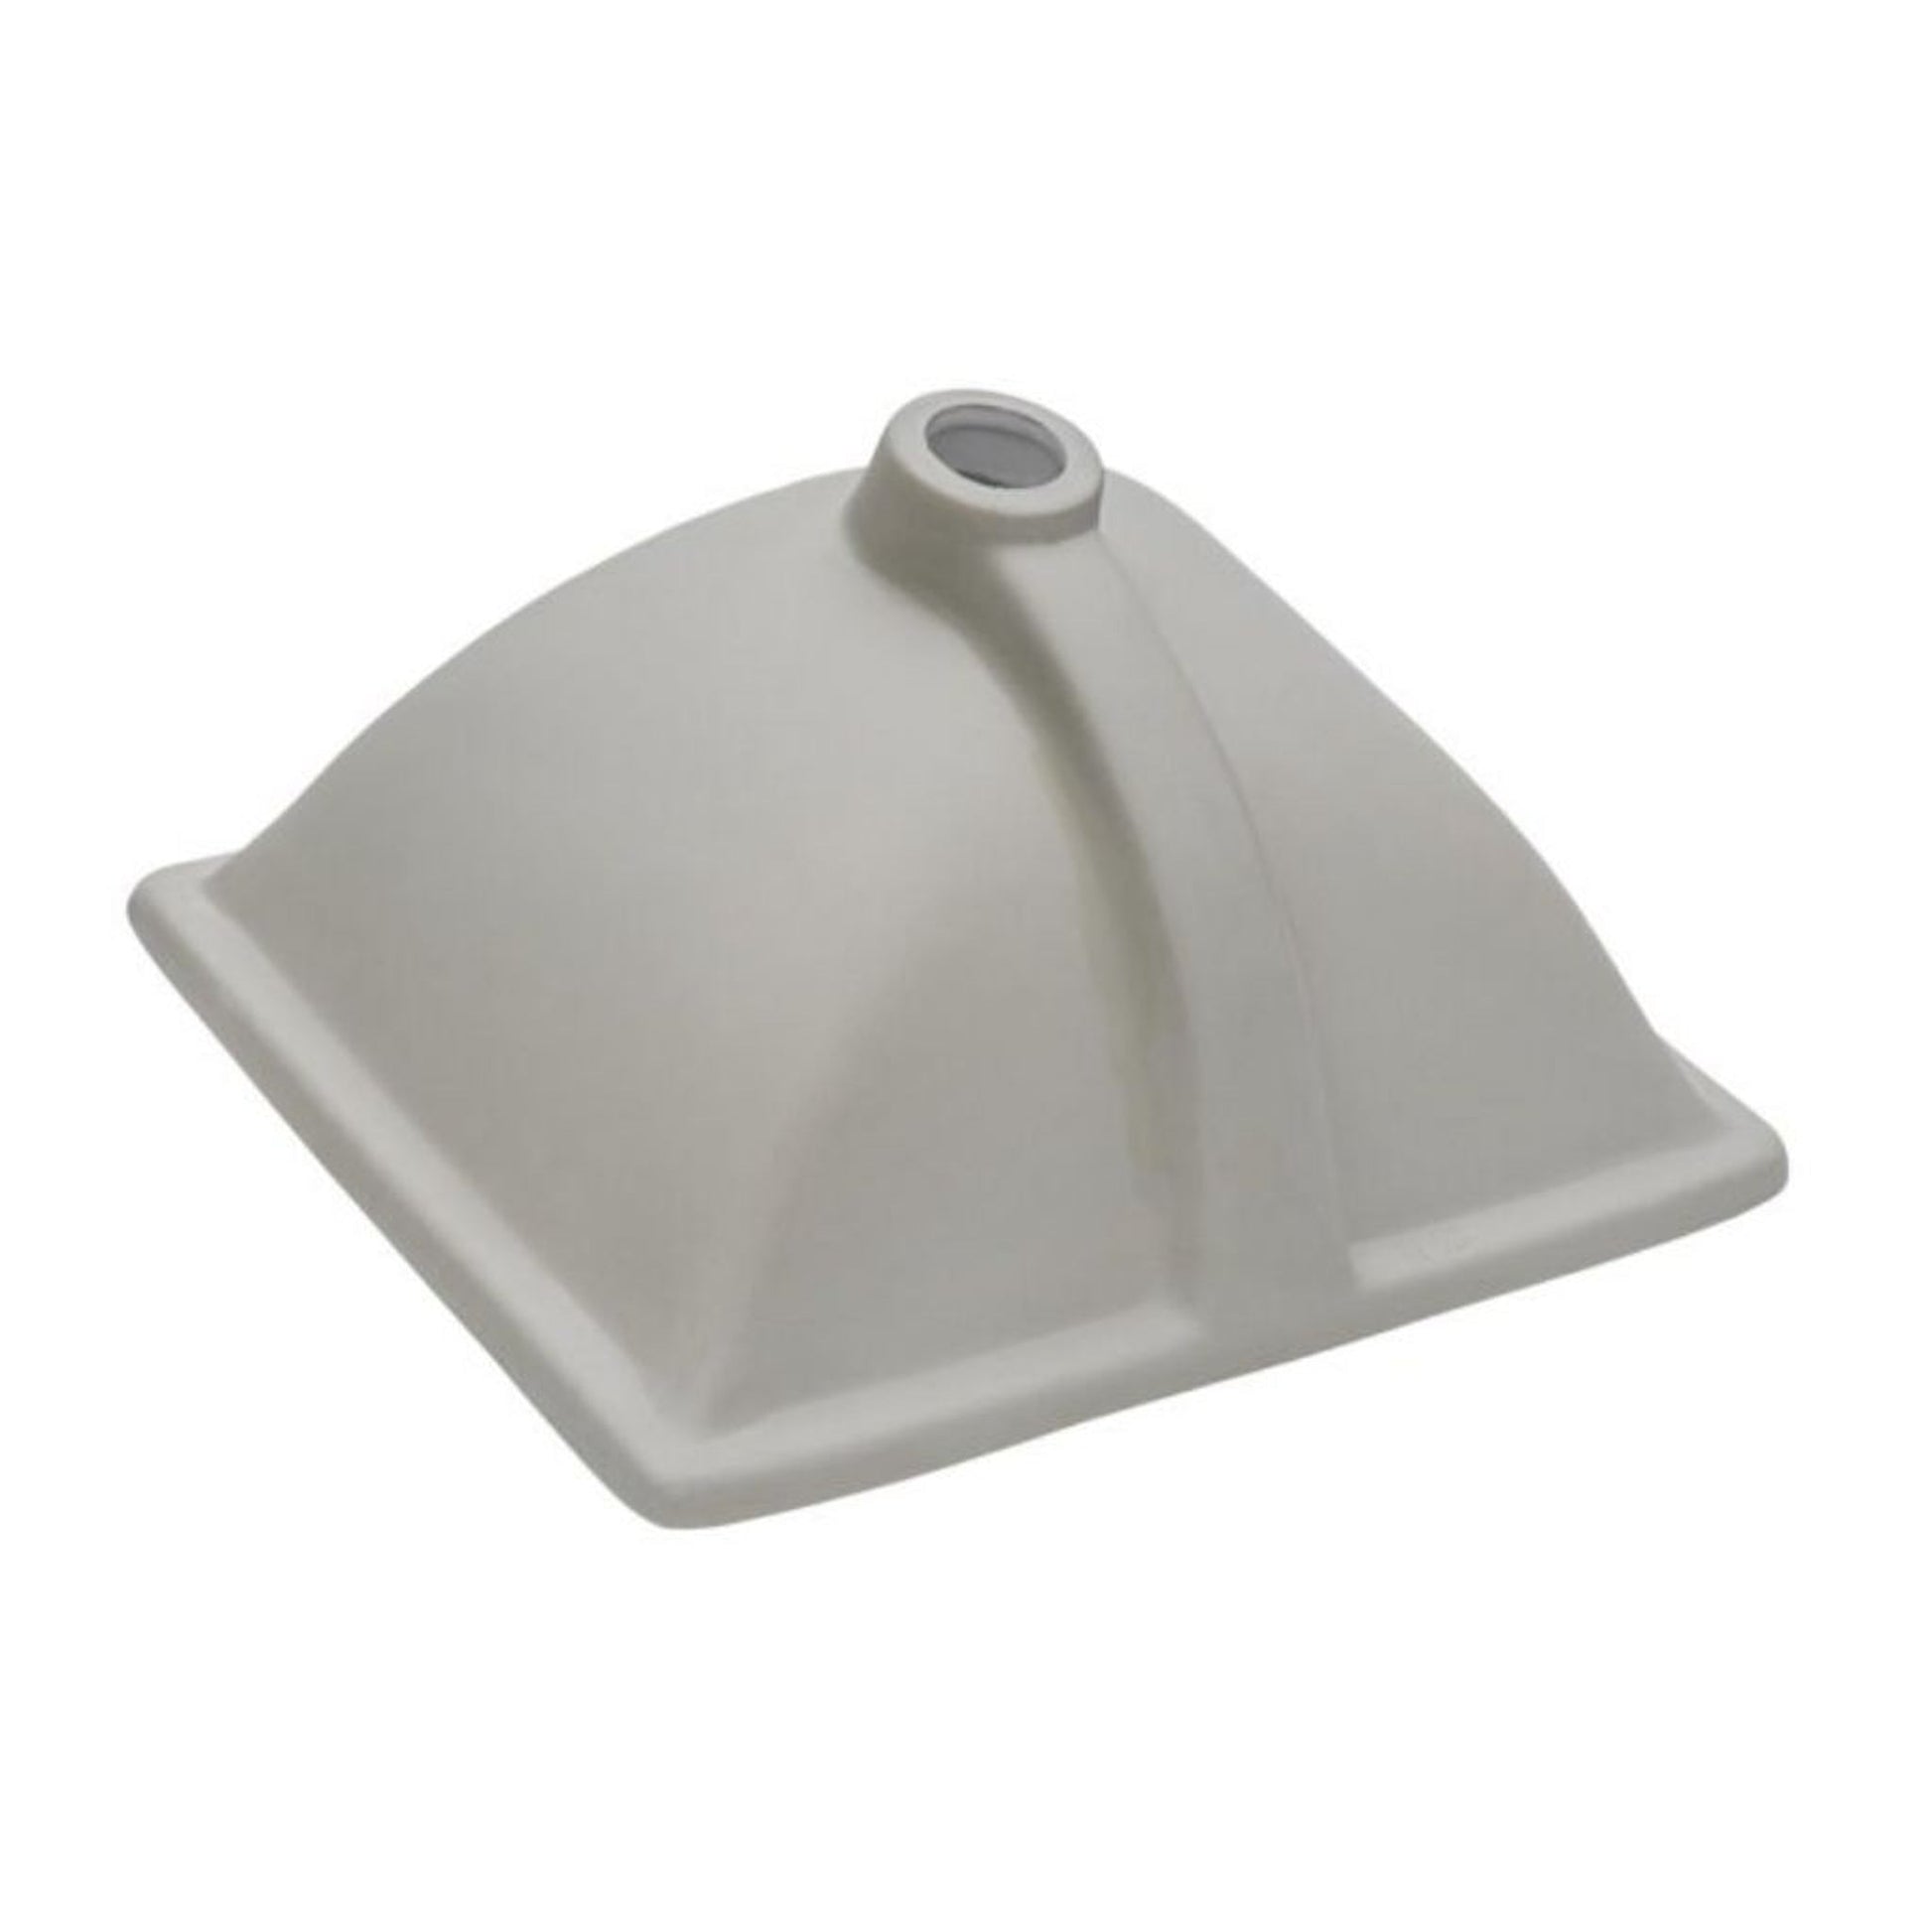 Allora USA 20.875" X 14.75" Biscuit Vitreous China Rectangular Porcelain Undermount Sink With Overflow